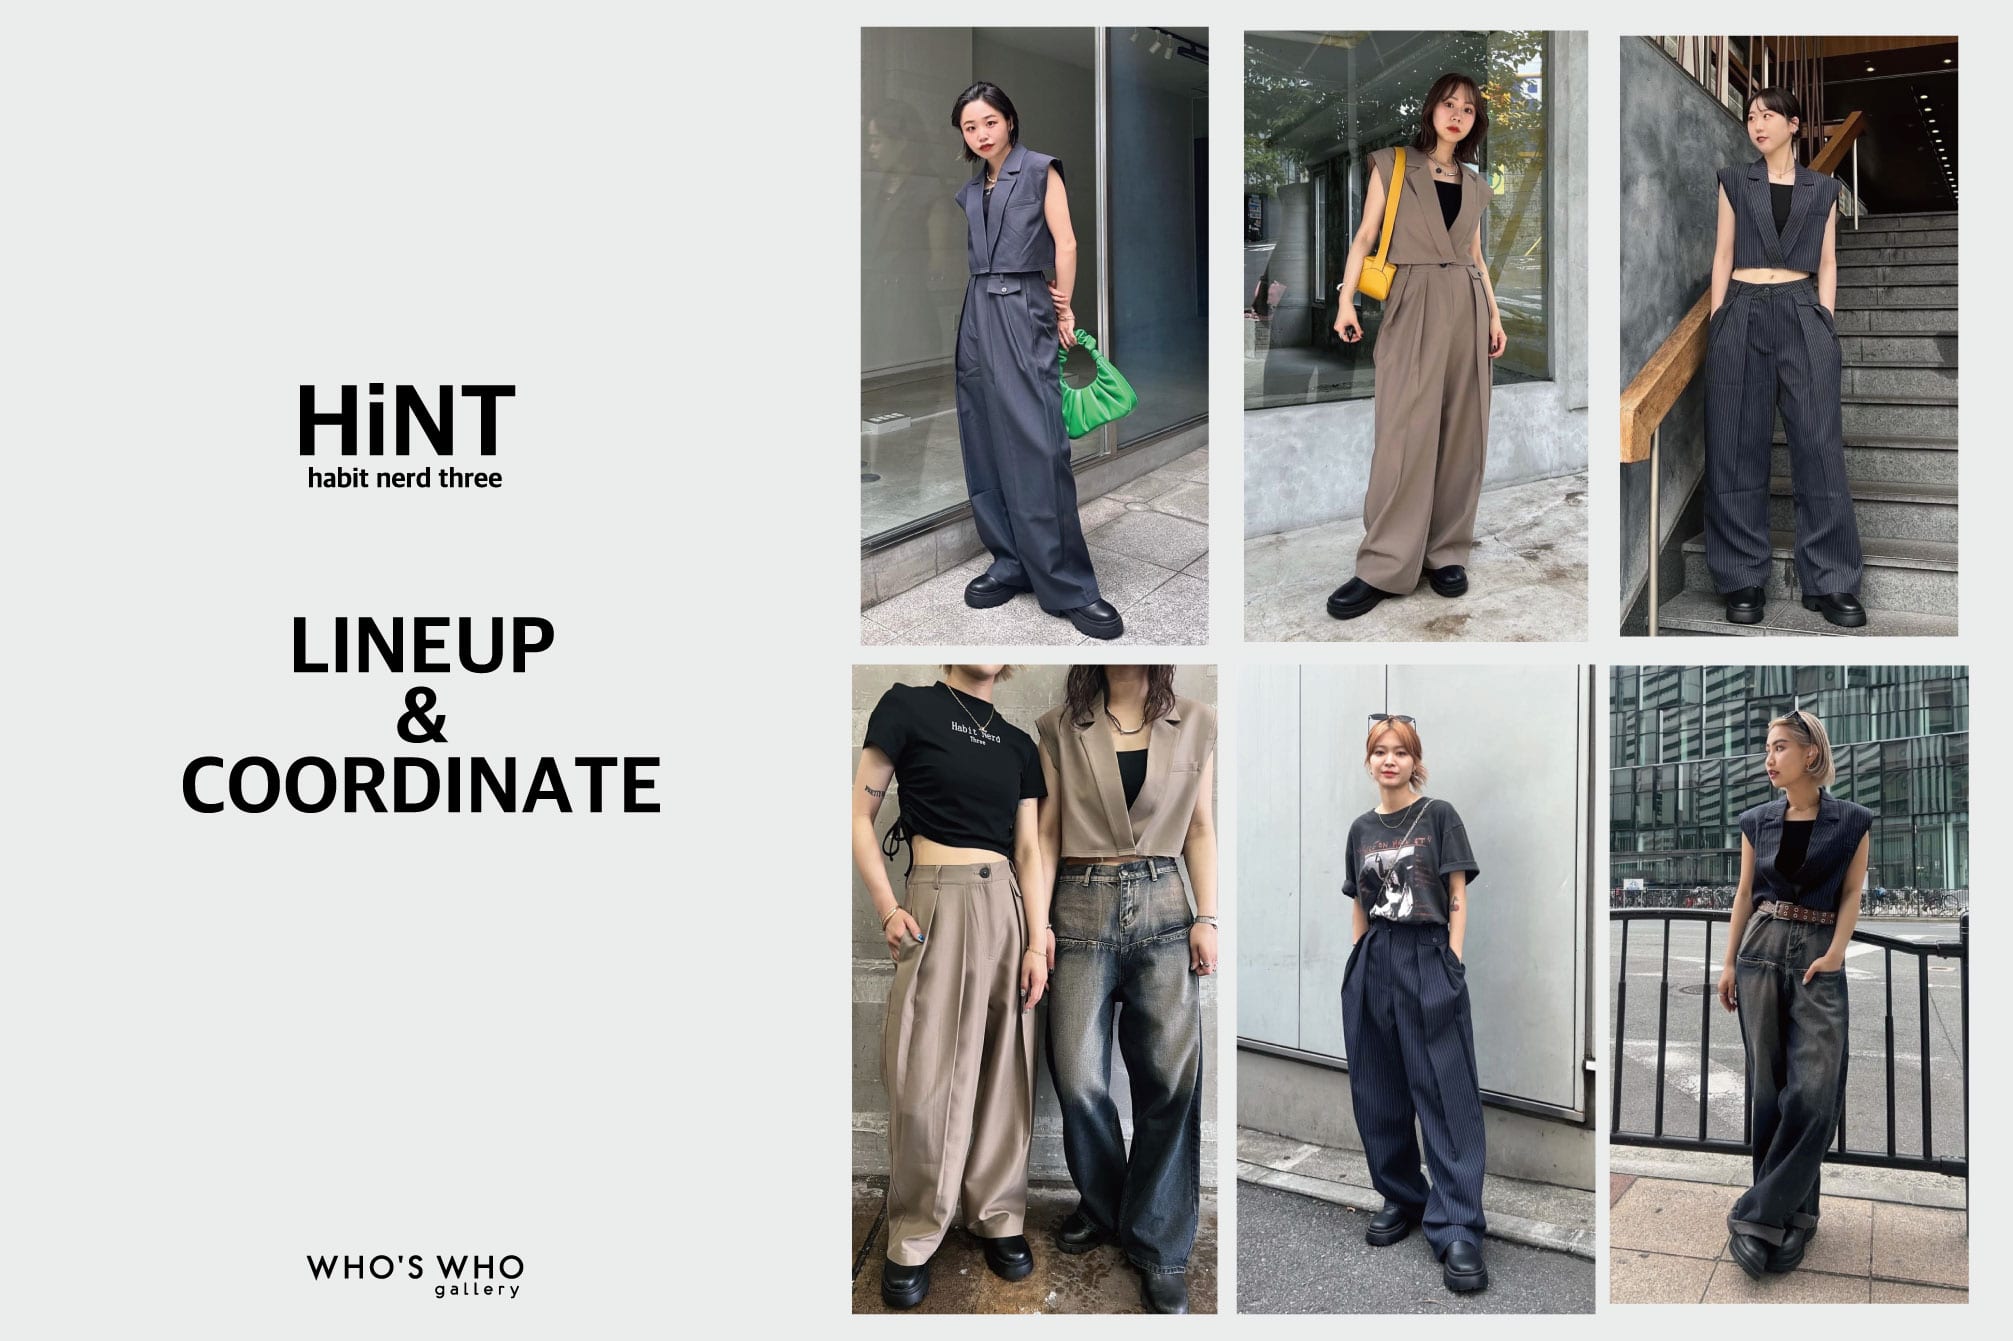 WHO’S WHO gallery 【HiNT LINEUP&COORDINATE】